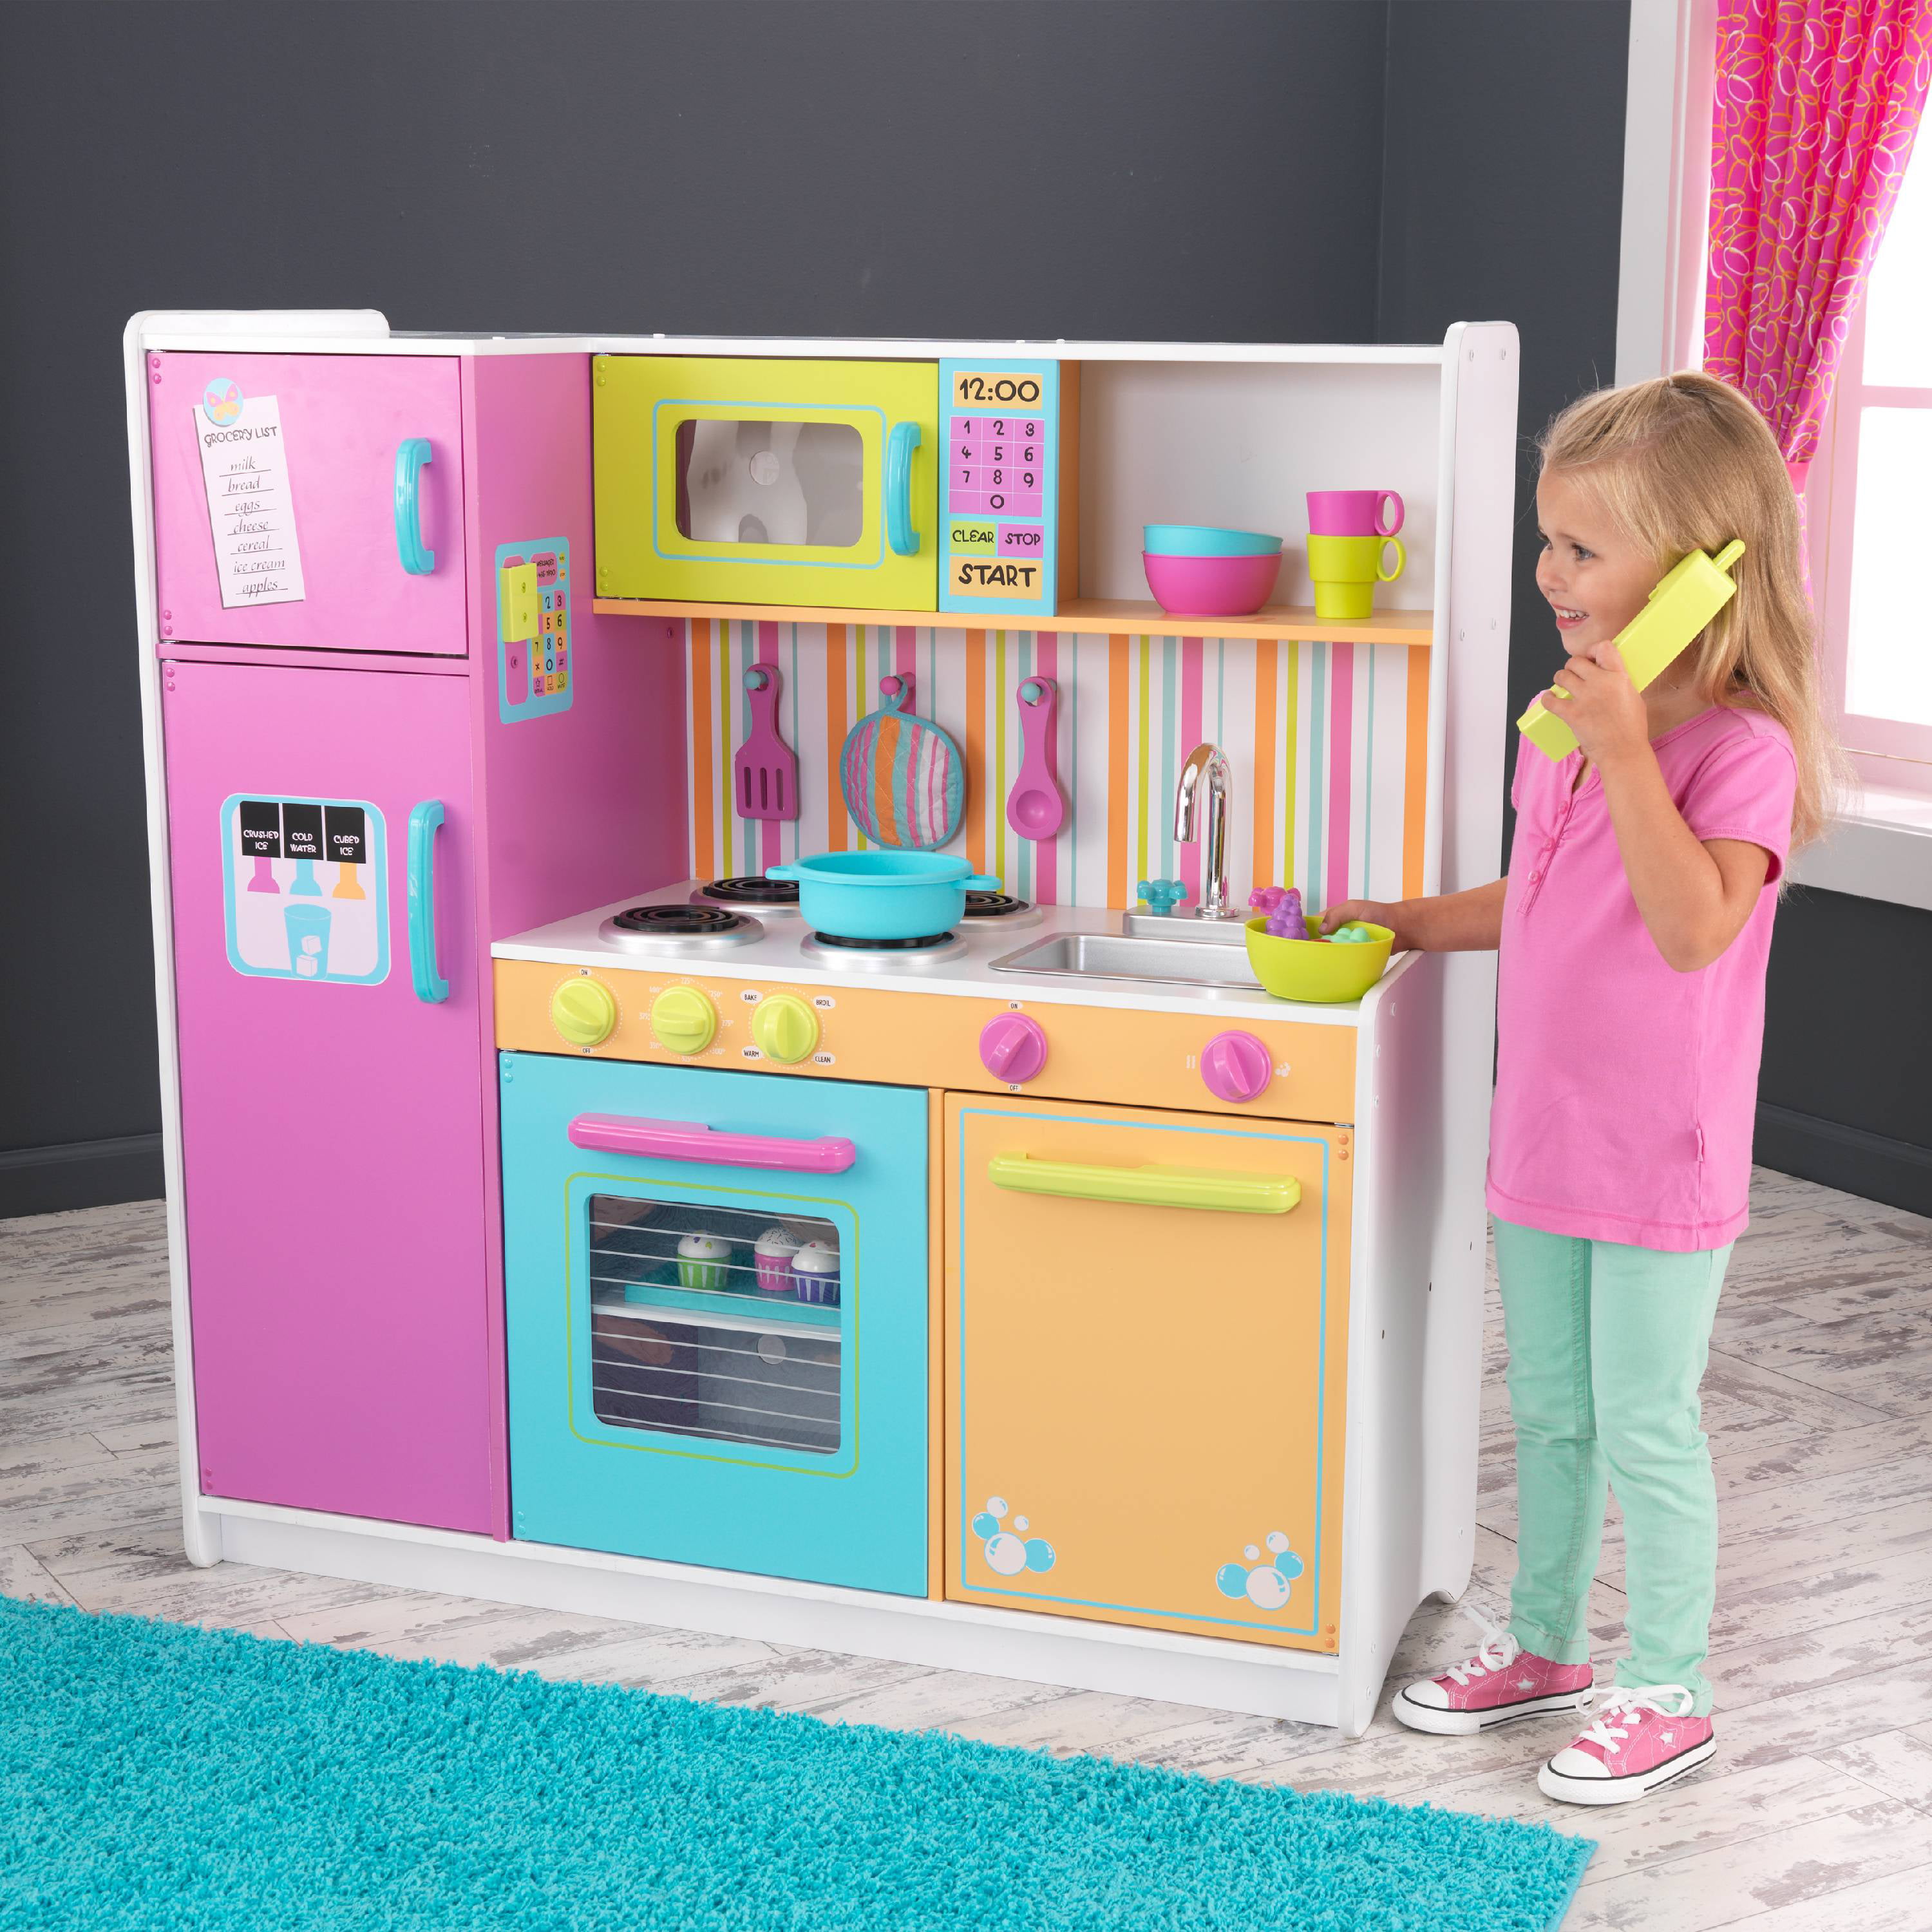 Kidkraft Deluxe Big And Bright Kids Kitchen Pretend Play Set Toy New Cooking Fun | eBay